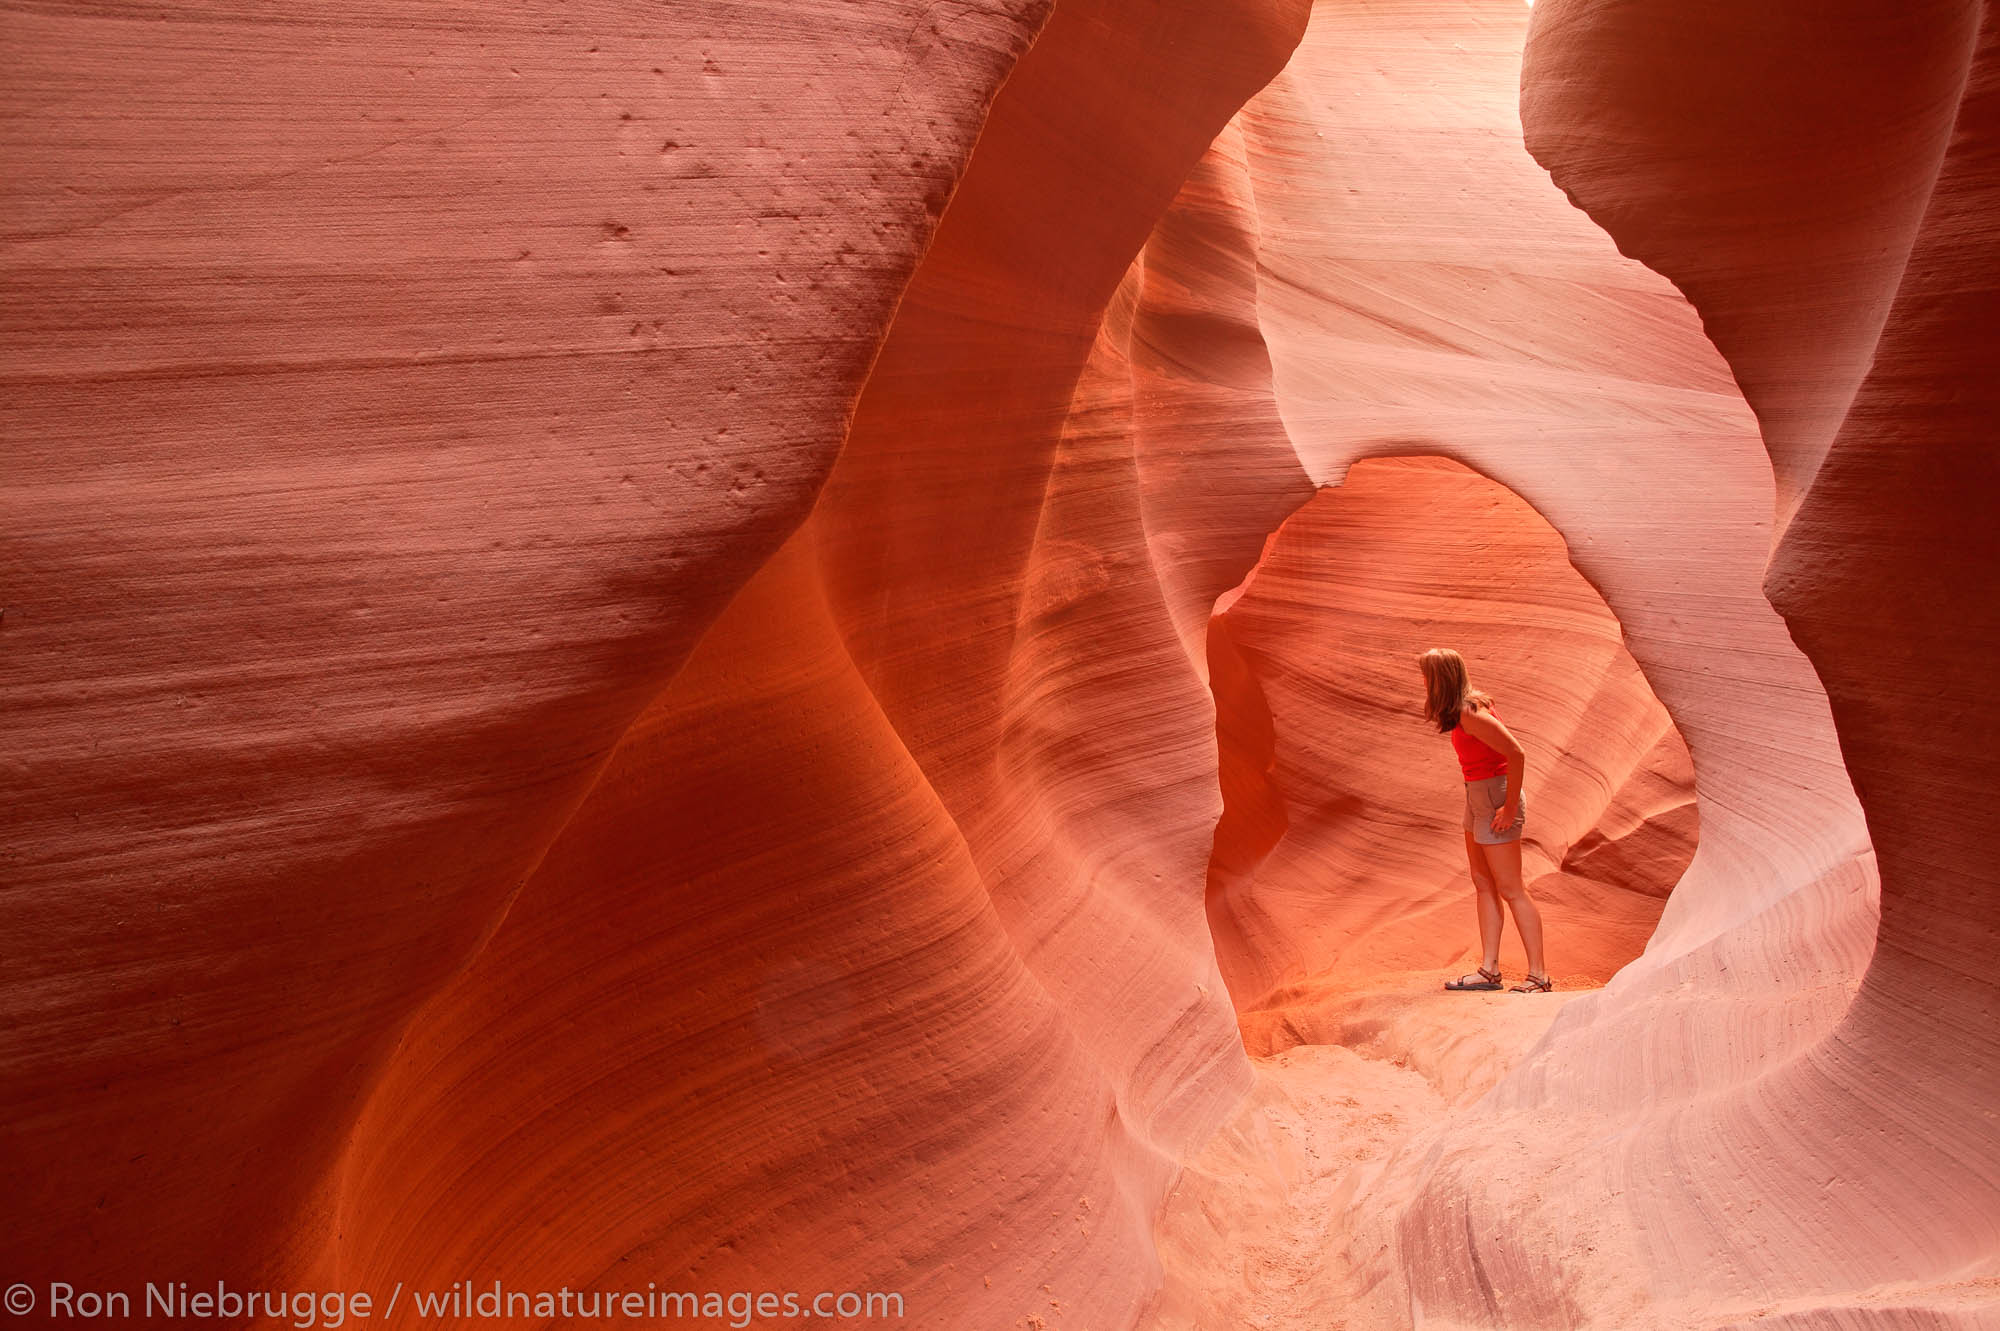 A visitor to the Lower Antelope Canyon, near Page, Arizona. (model released)